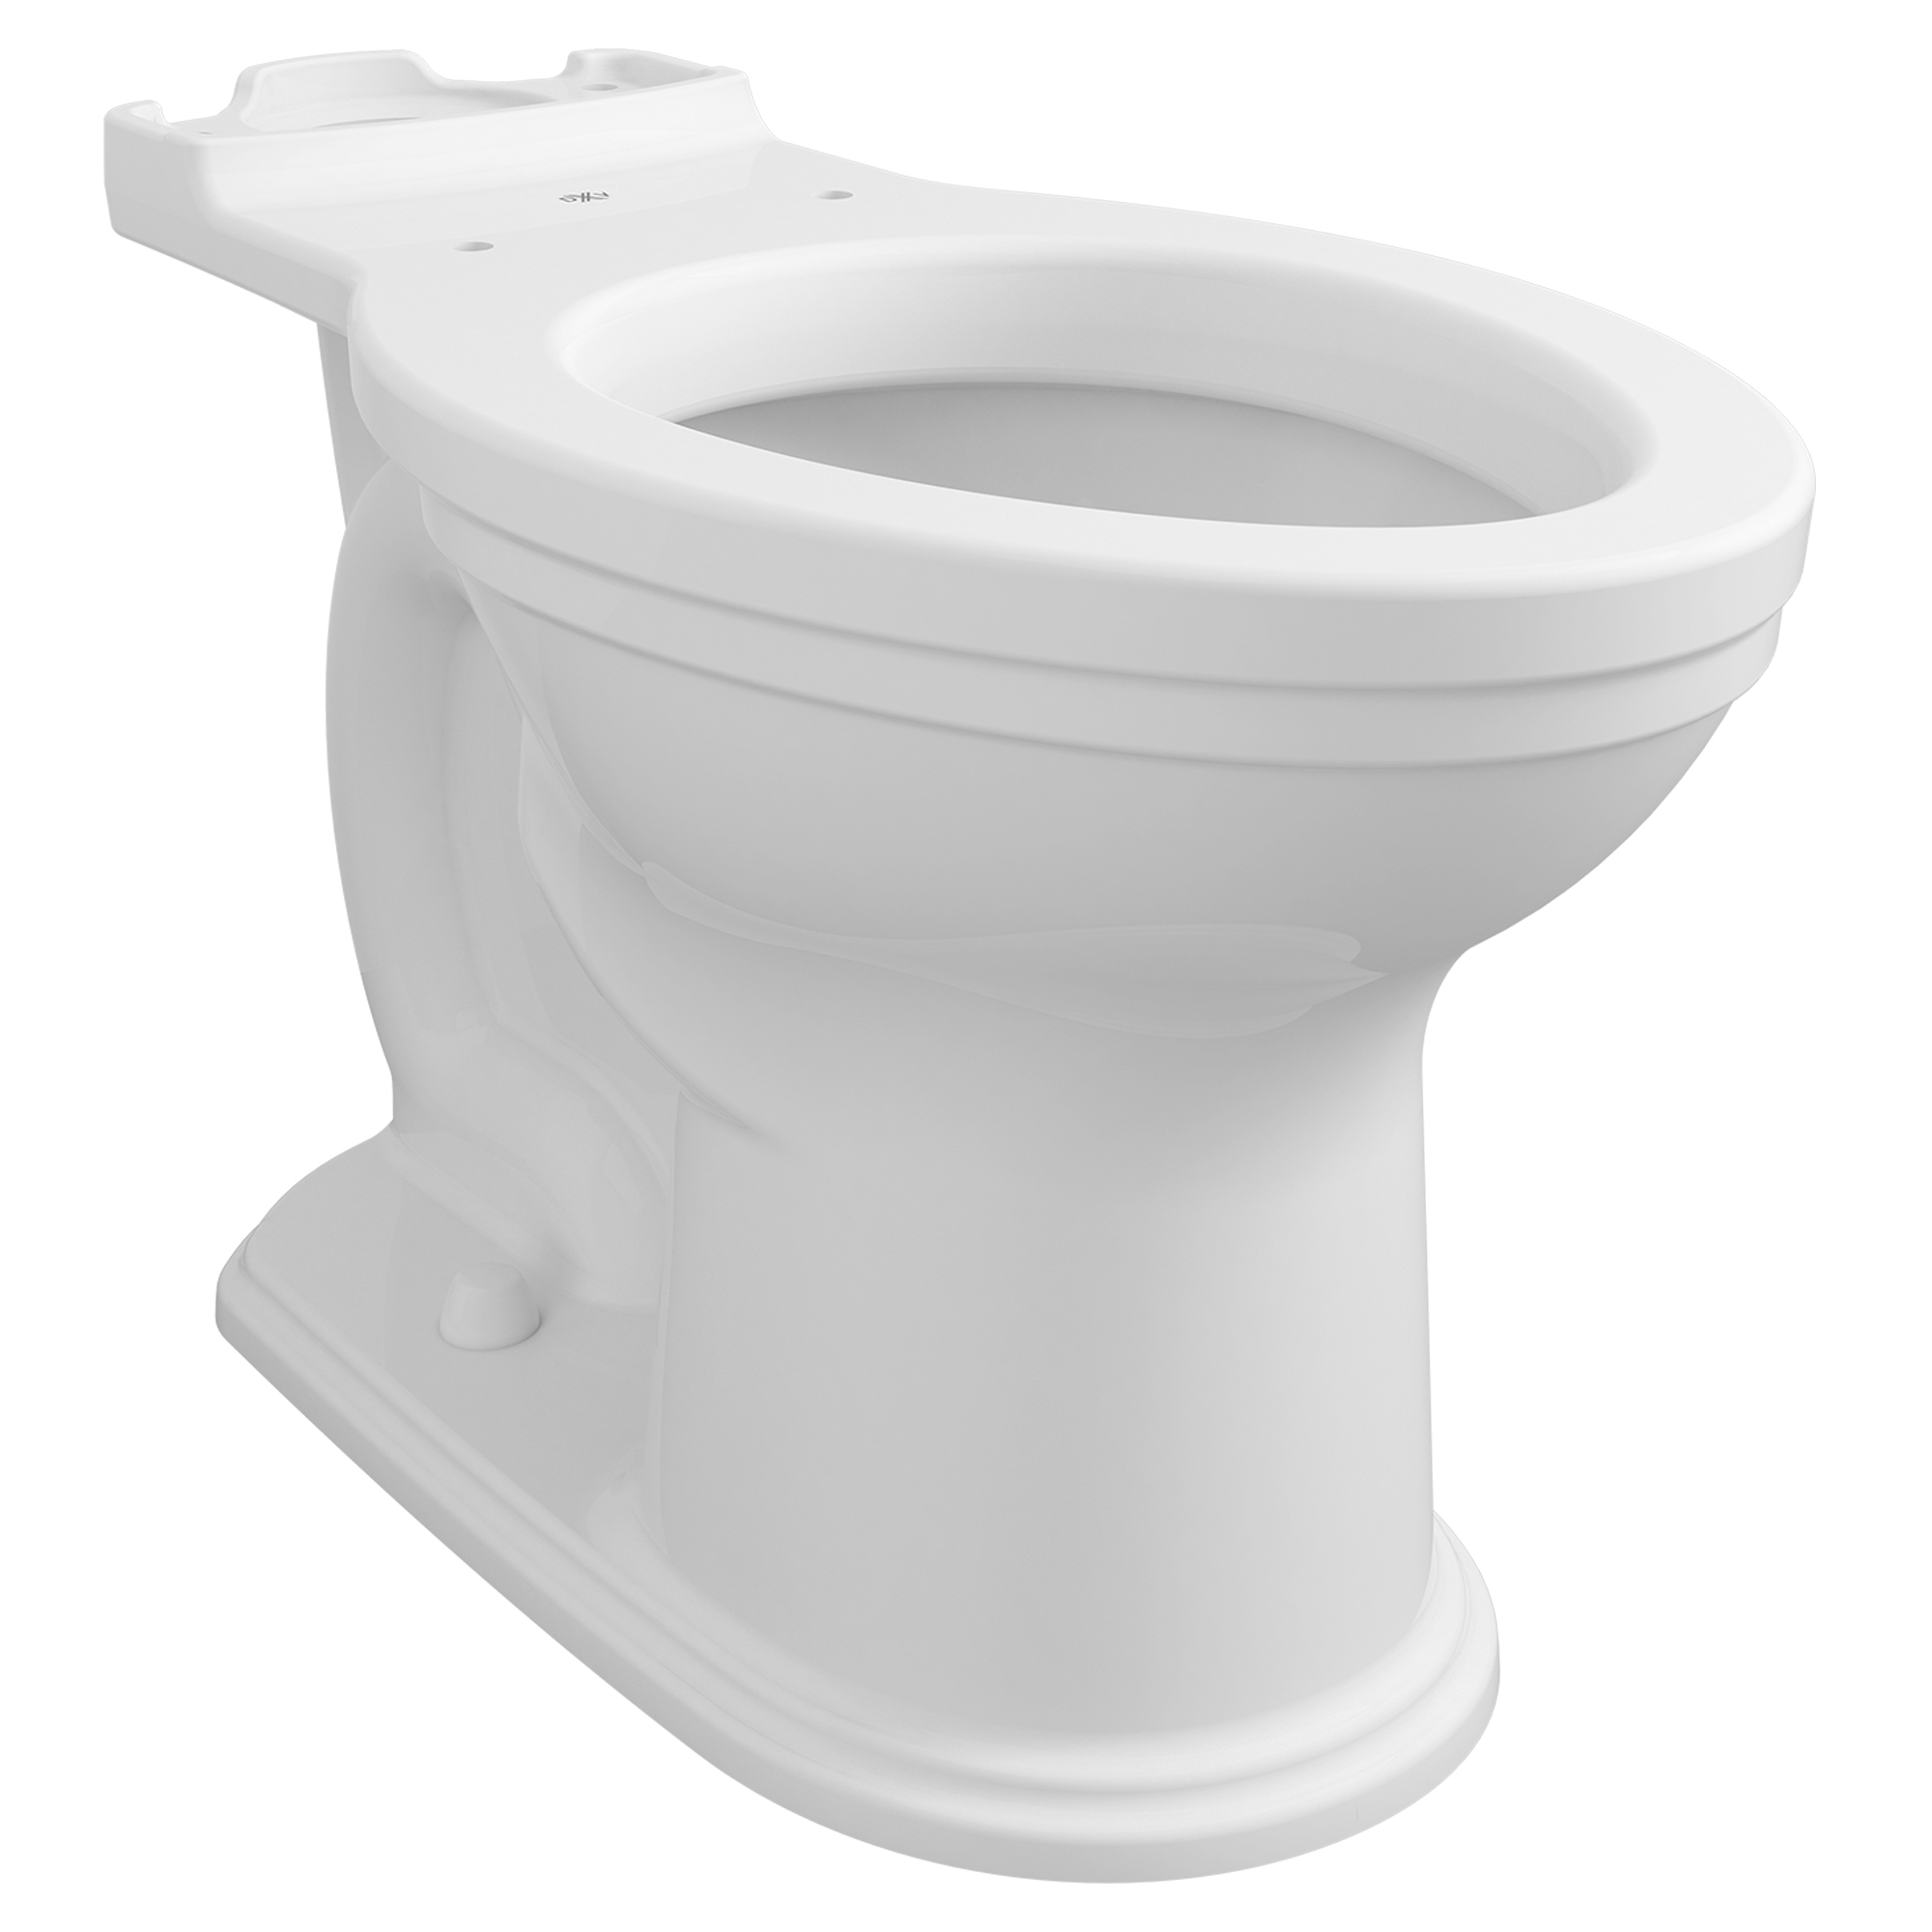 Saint George Chair Height Elongated Toilet Bowl with Seat